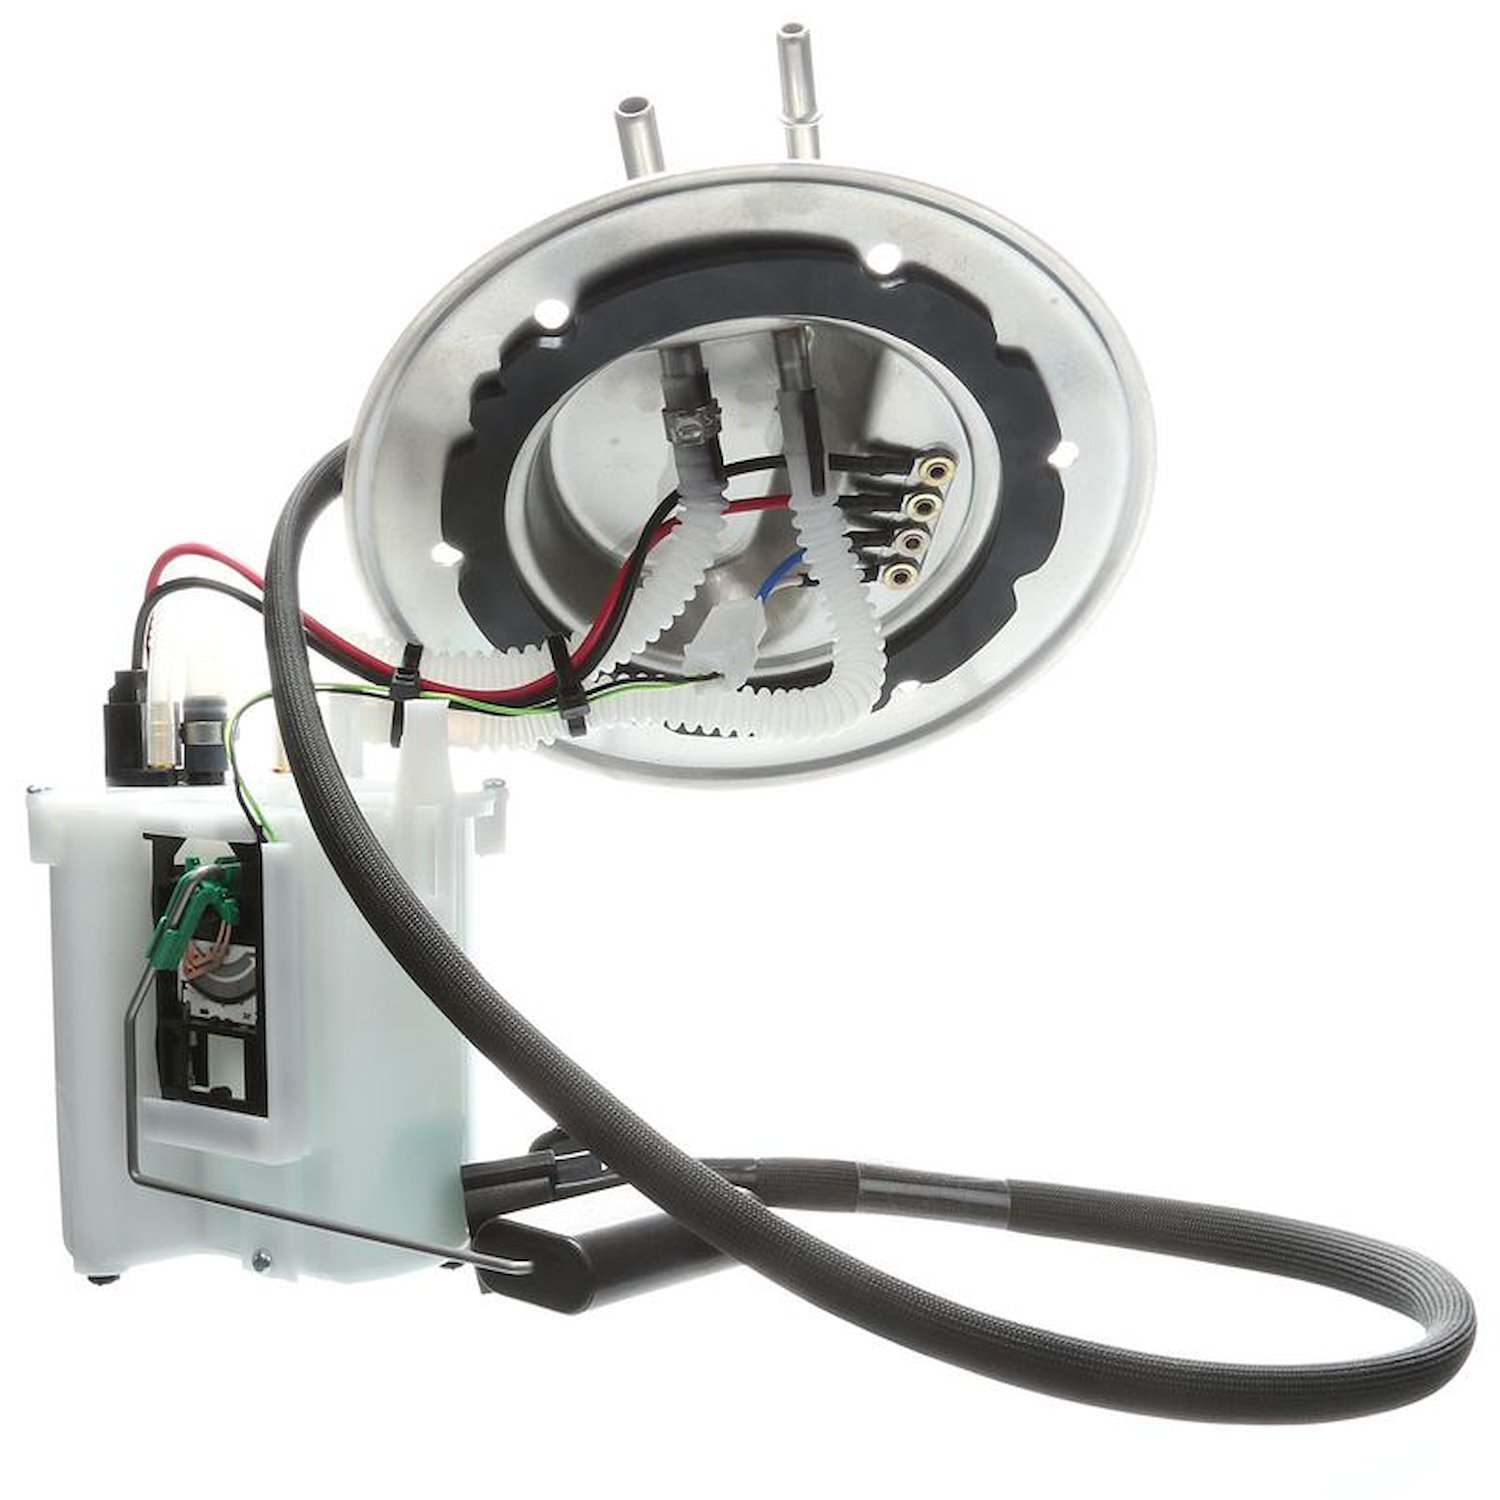 OE Ford Replacement Fuel Pump Module Assembly for 1998 Ford Mustang